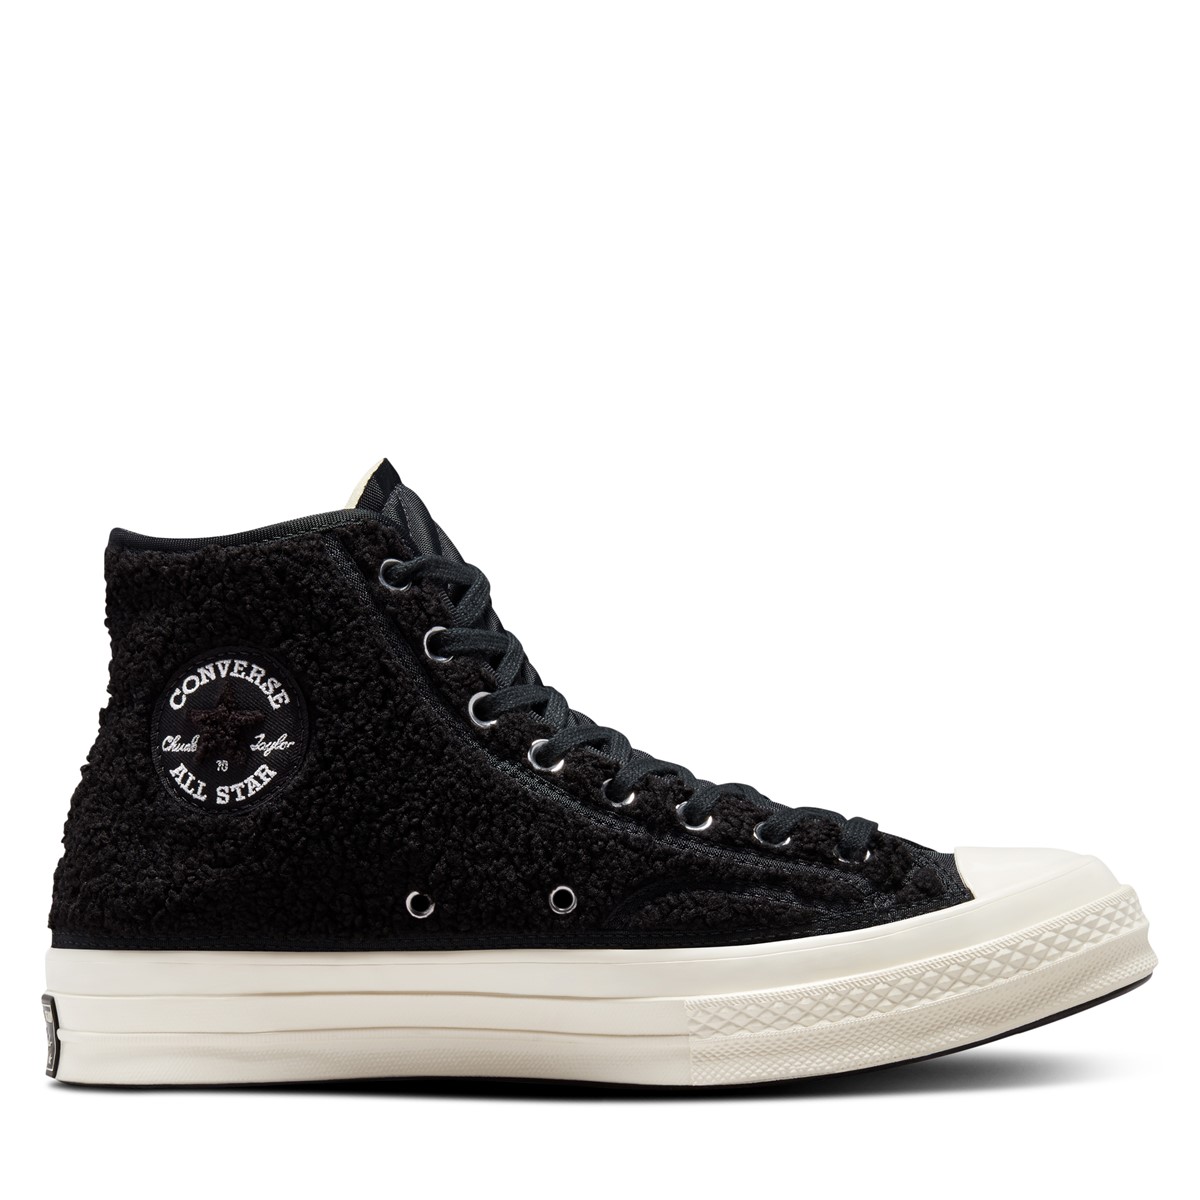 Chuck 70 Sherpa High-Top Sneakers in Black/White